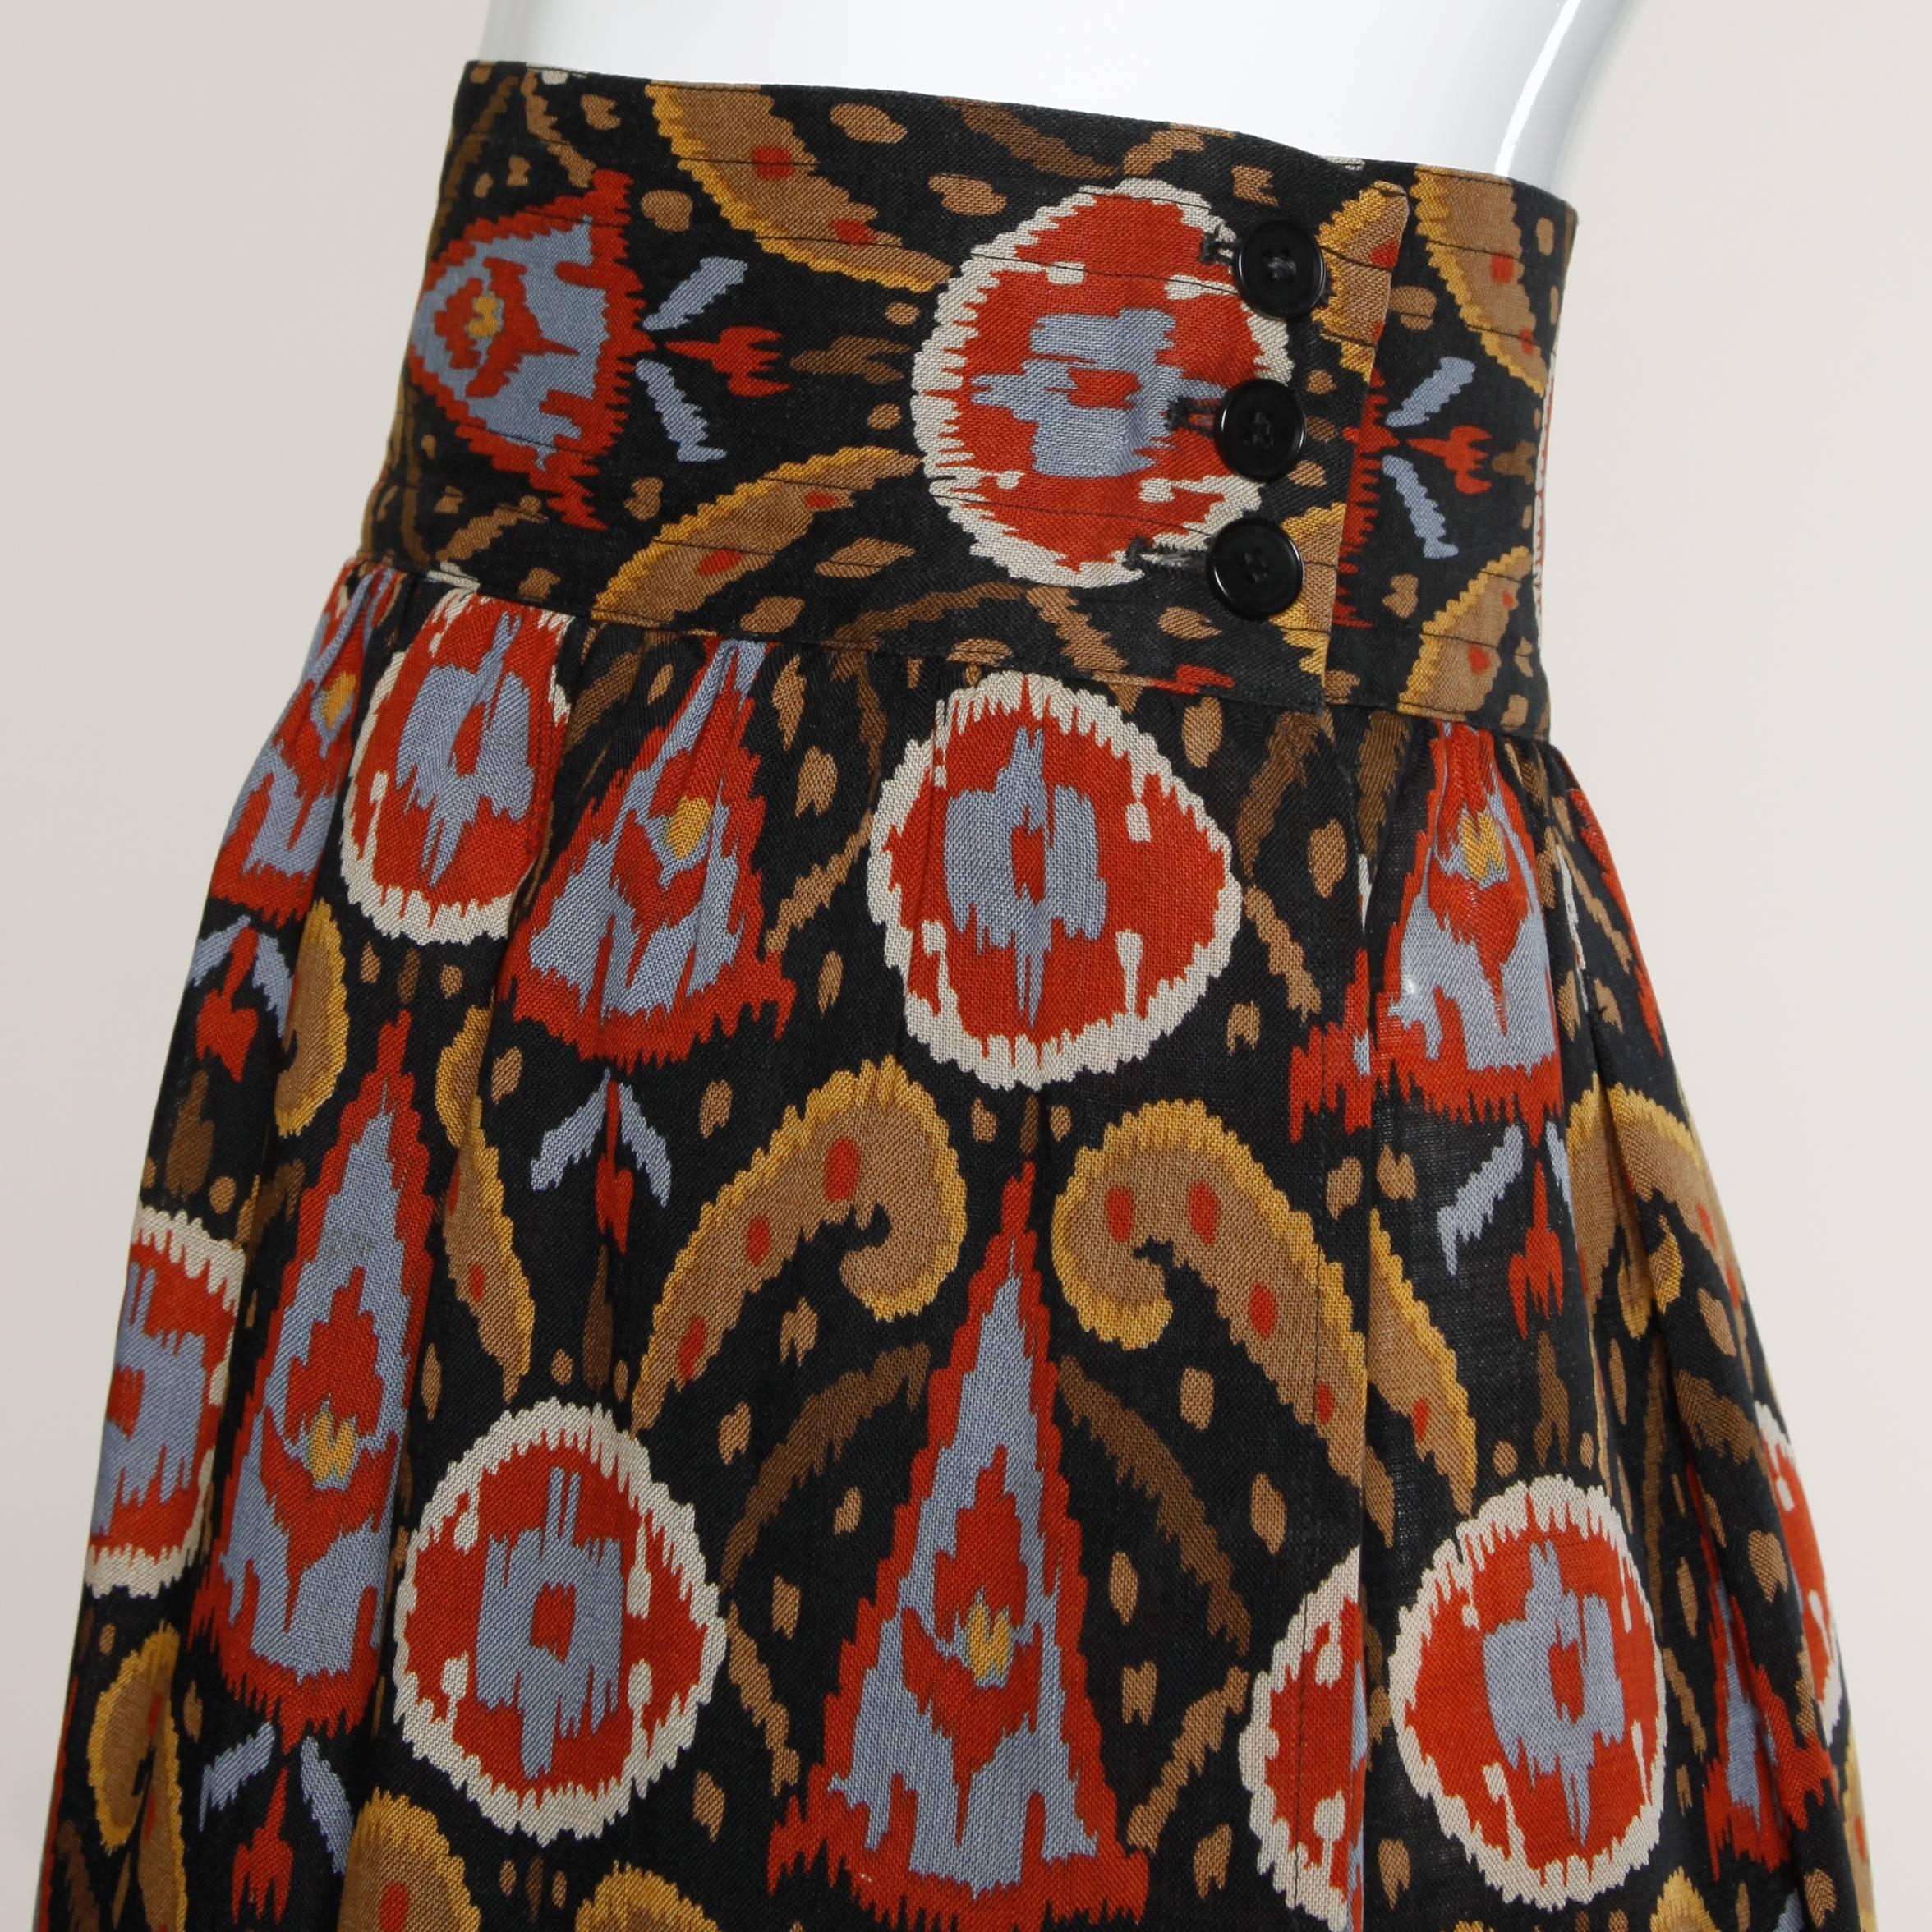 Gorgeous vintage Yves Saint Laurent Rive Gauche ikat-inspired printed wool skirt with belt tie.

Details:

Unlined
Side Pockets
Side Hook and Button Closure 
Marked Size: 42
Color: Black/ Burnt Orange/ Blue/ Beige/ Dark Green
Fabric: 100%